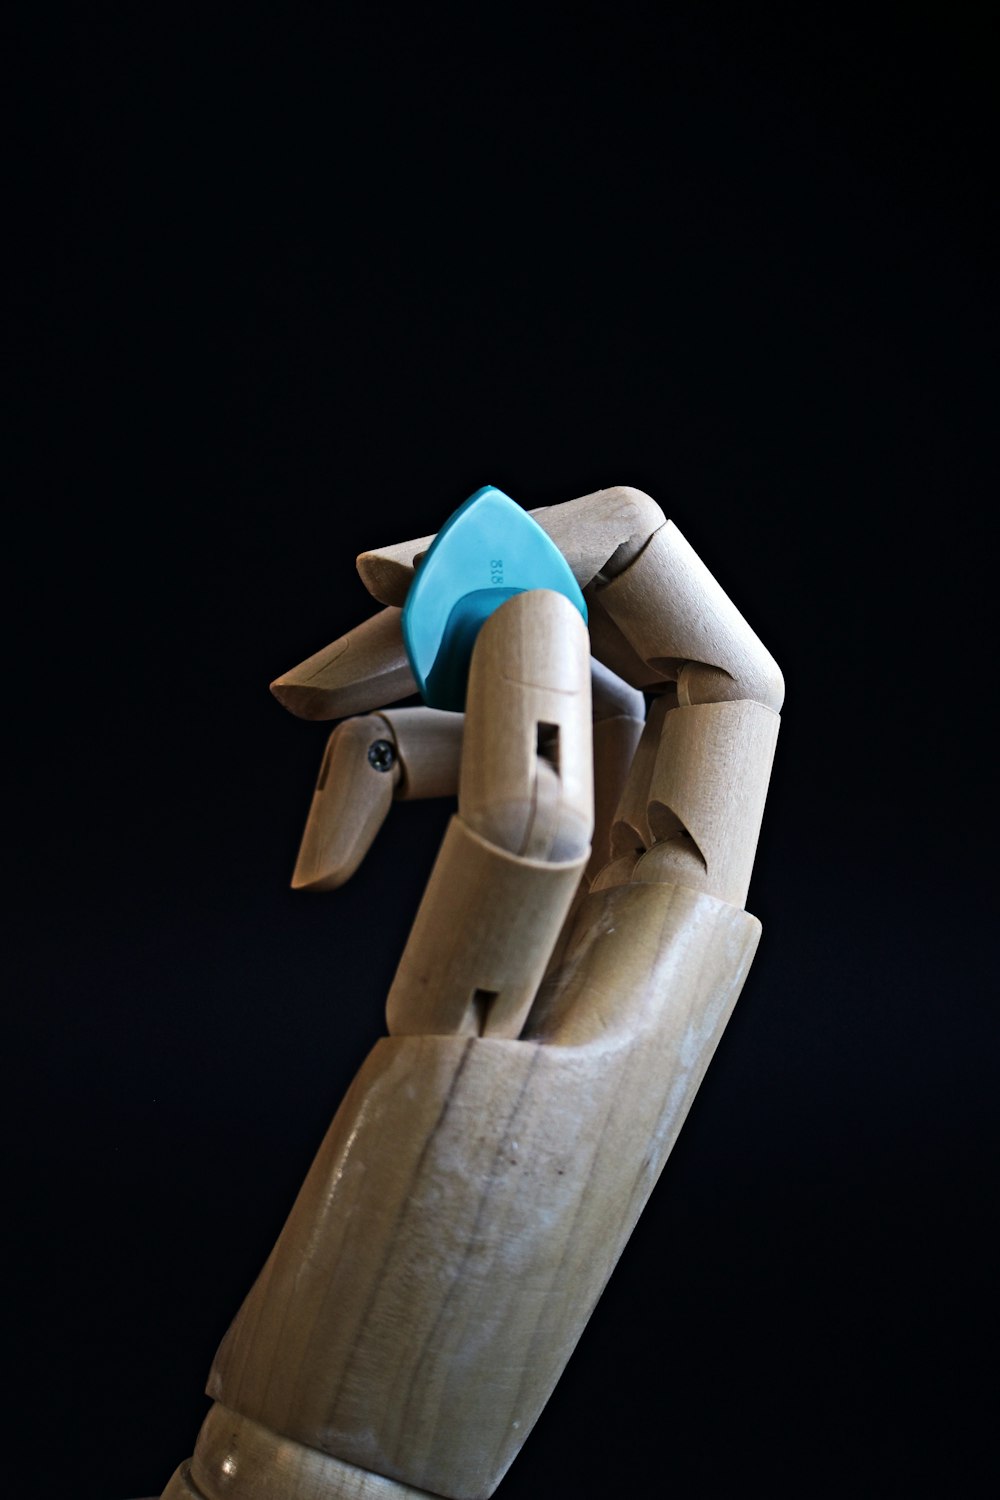 a wooden sculpture of a hand holding a blue object